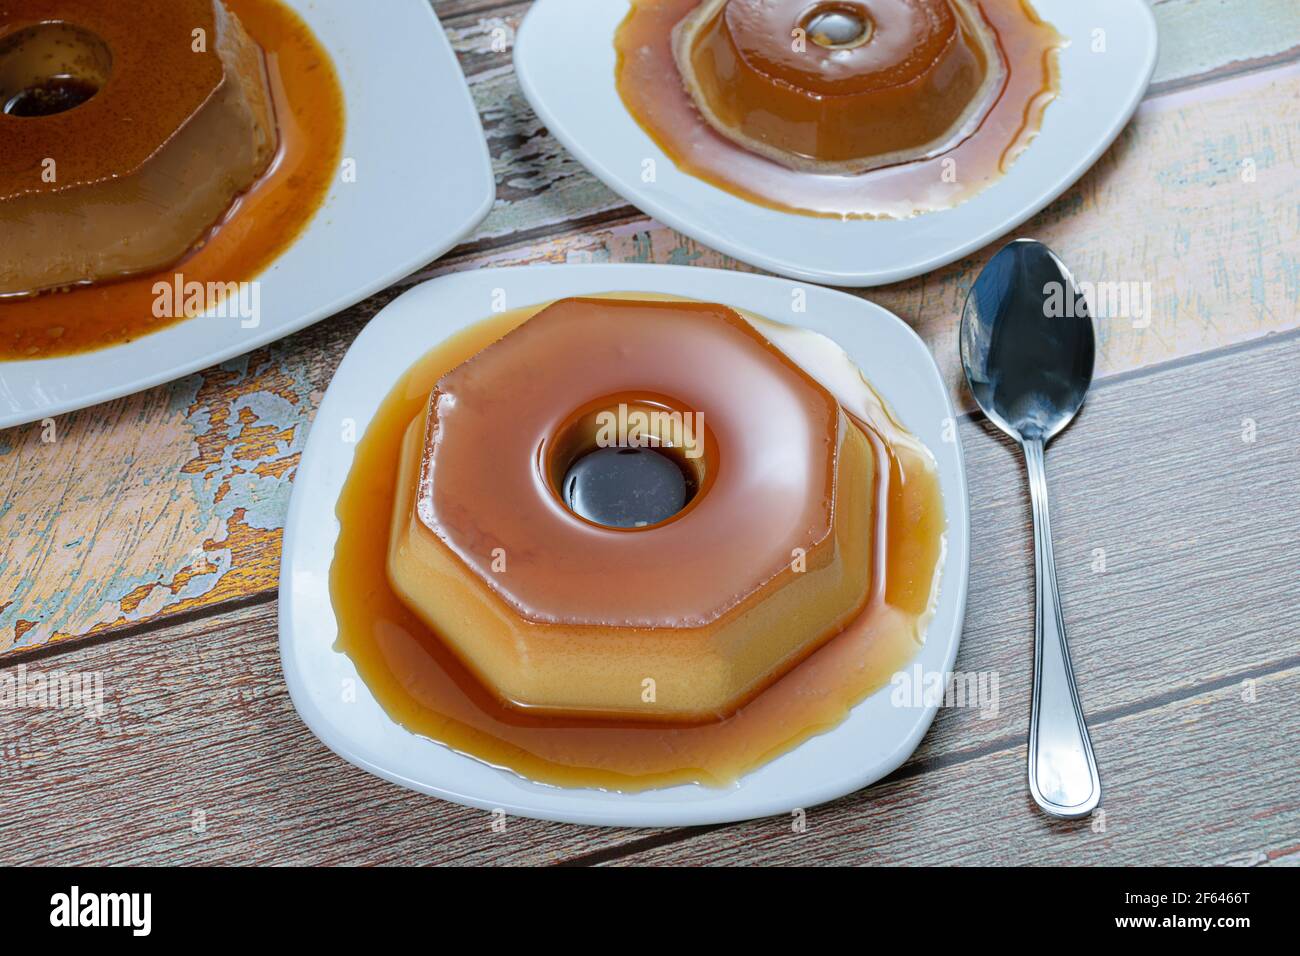 Condensed milk pudding with caramel syrup, surrounded by other puddings and a spoon. Traditional Brazilian sweet. Stock Photo